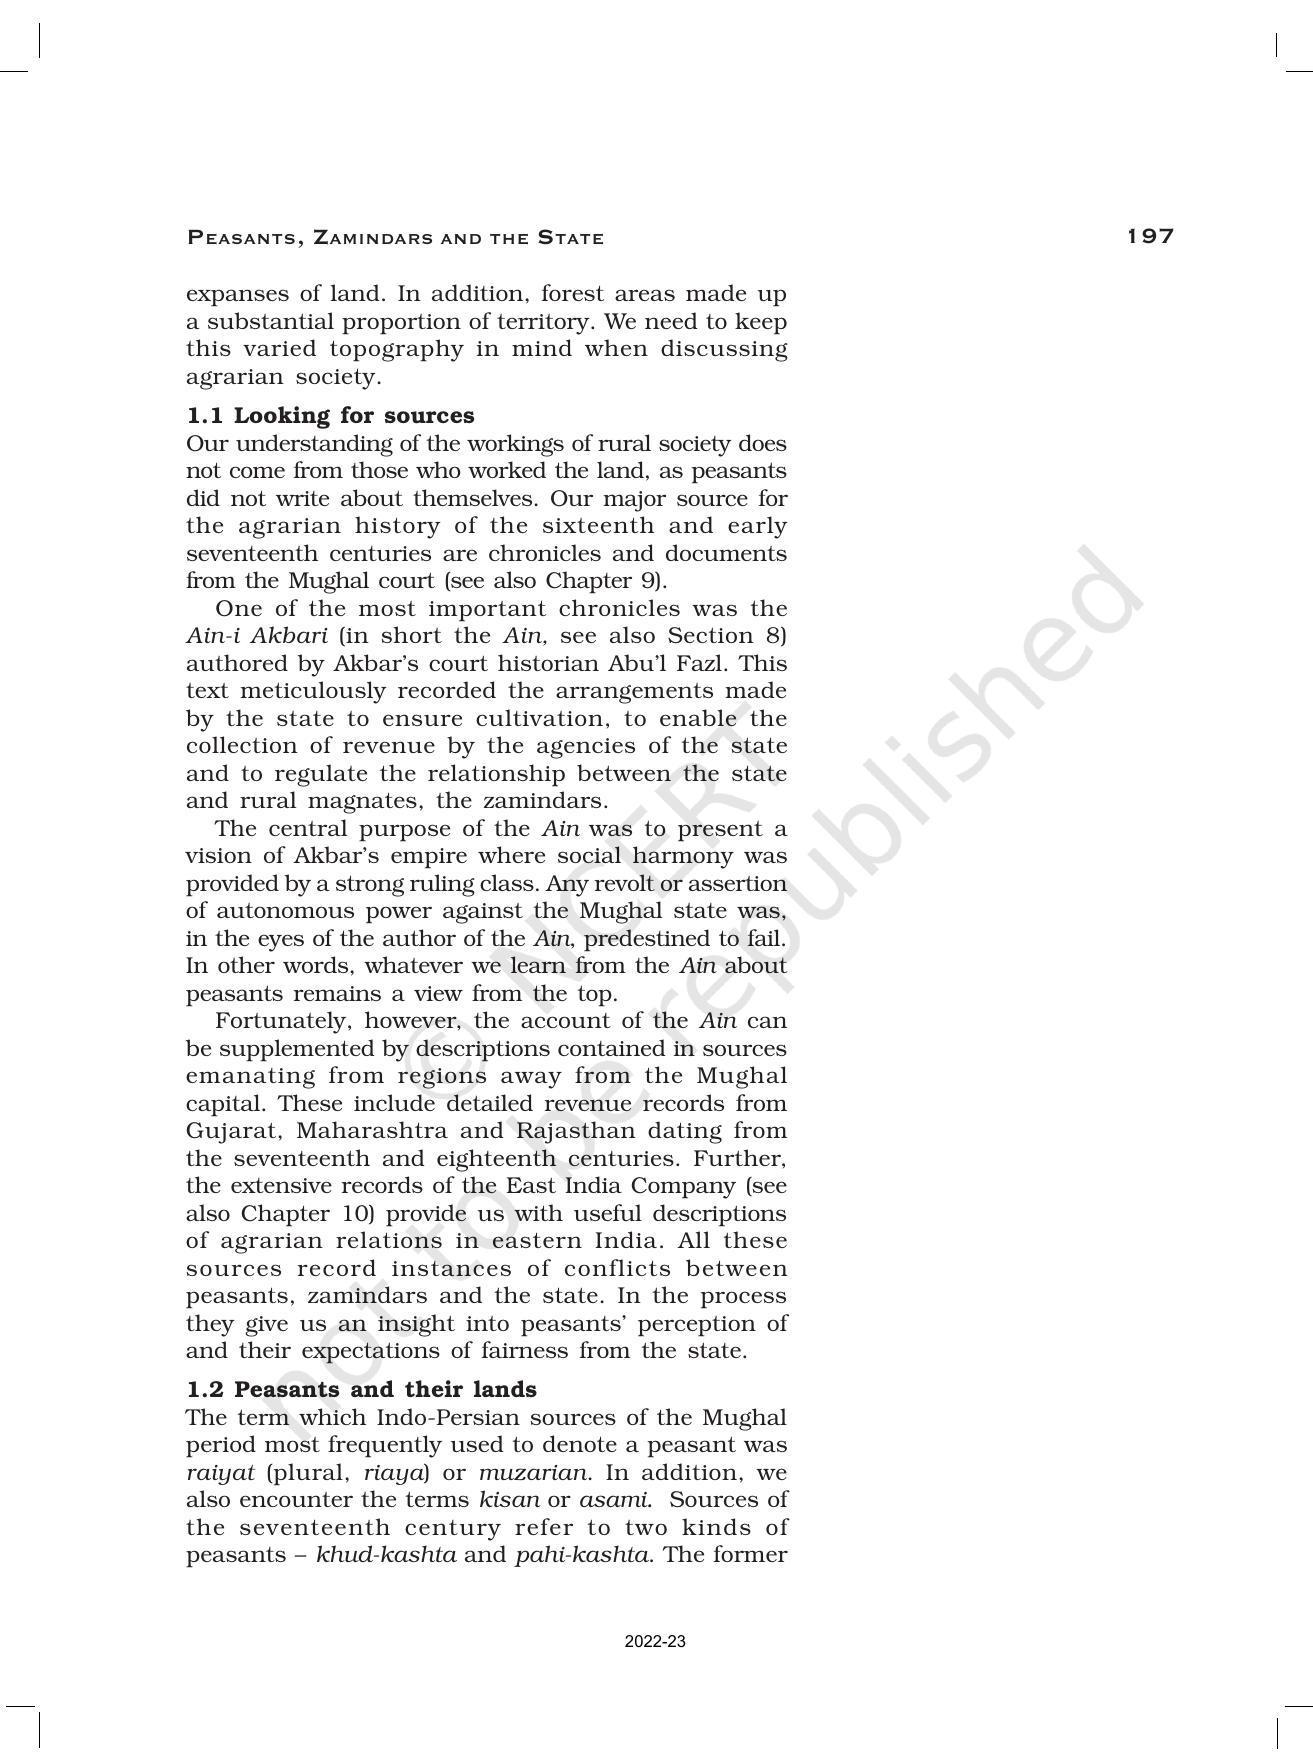 NCERT Book for Class 12 History (Part-II) Chapter 8 Peasants, Zamindars, and the State - Page 2